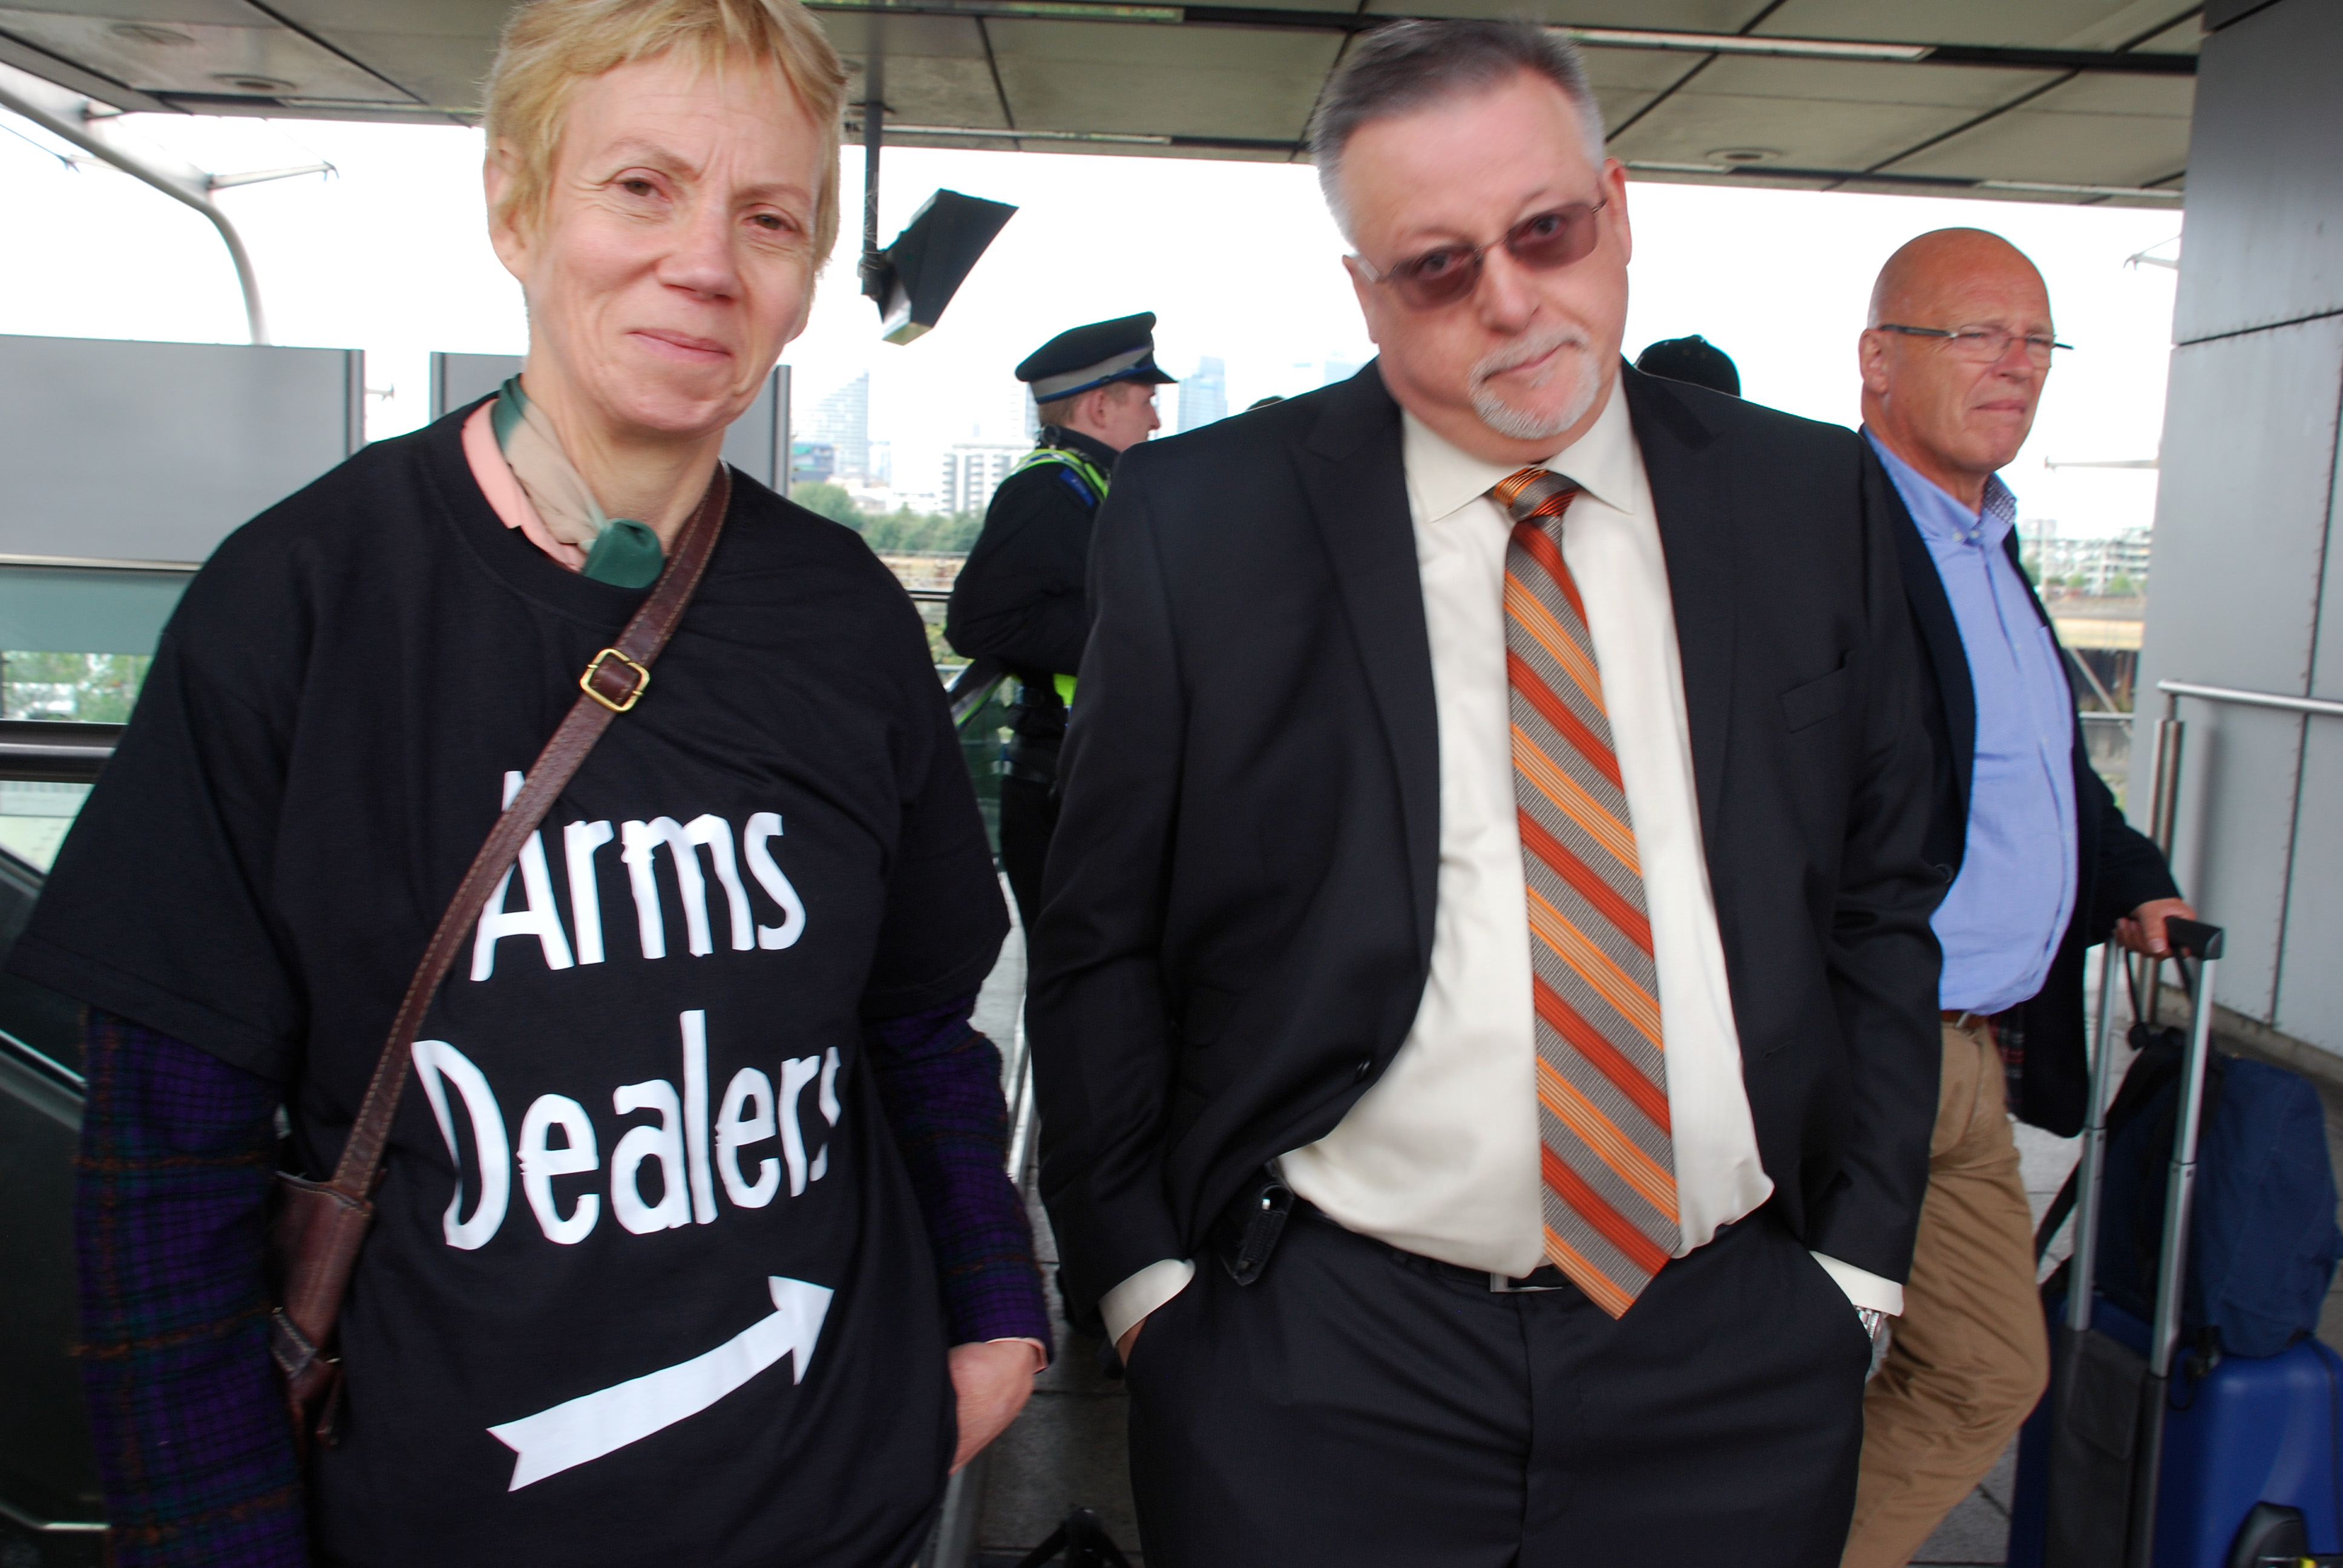 Activist with a T-shirt reading "Arms Dealer" and an arrow pointing sideways stands next to an arms fair delegate